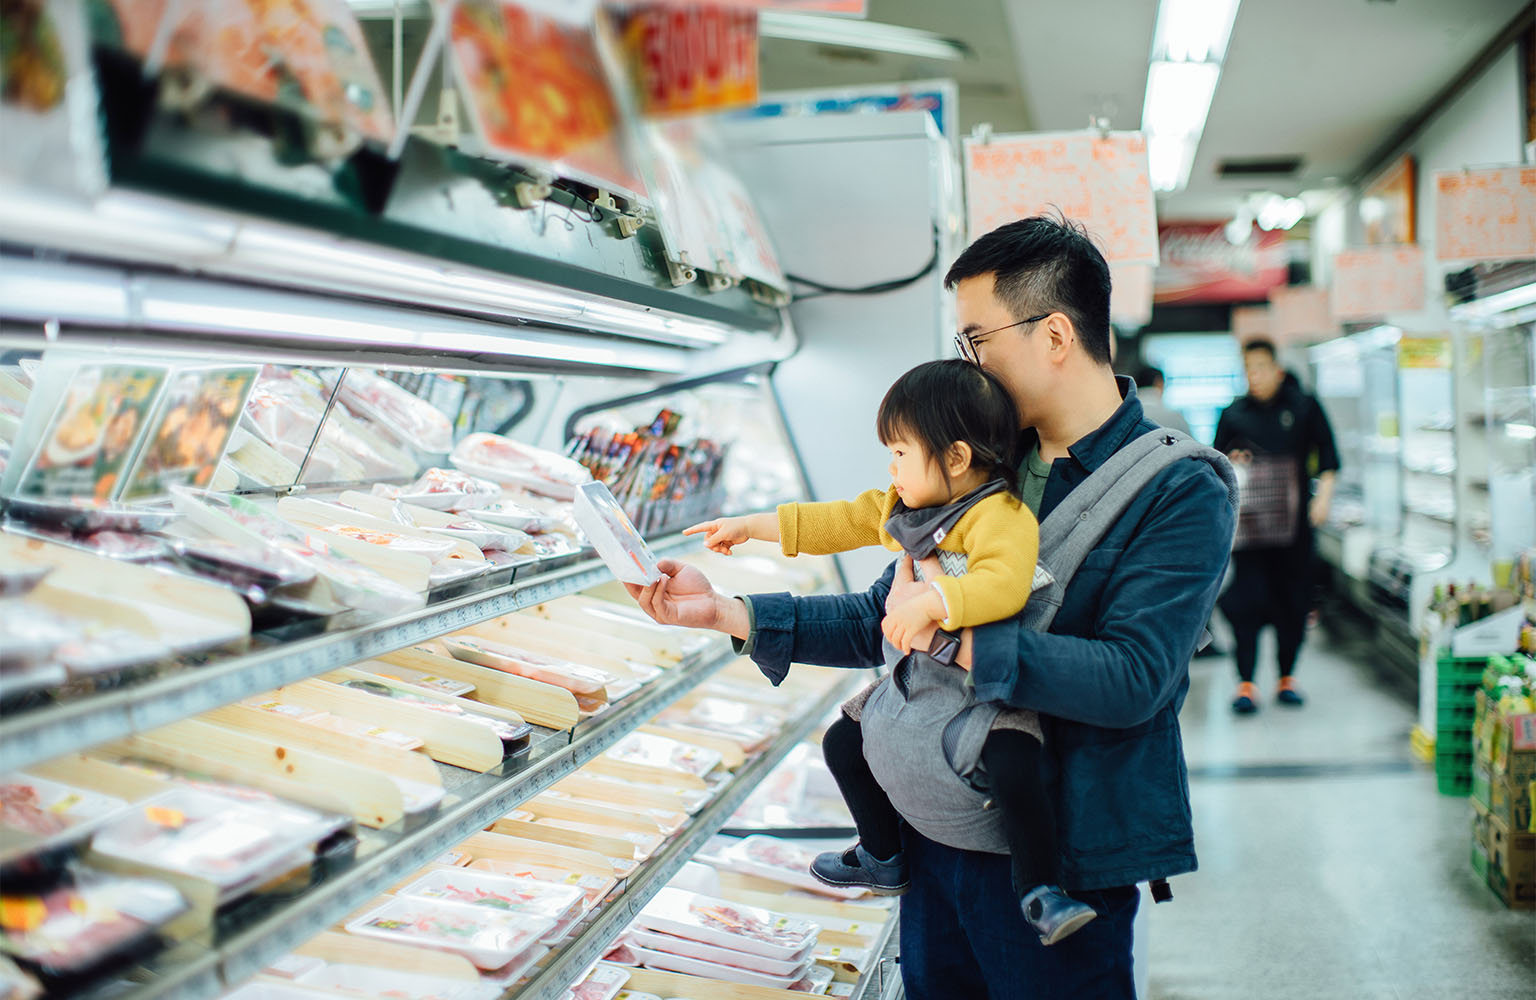 Man holding toddler perusing grocery aisle